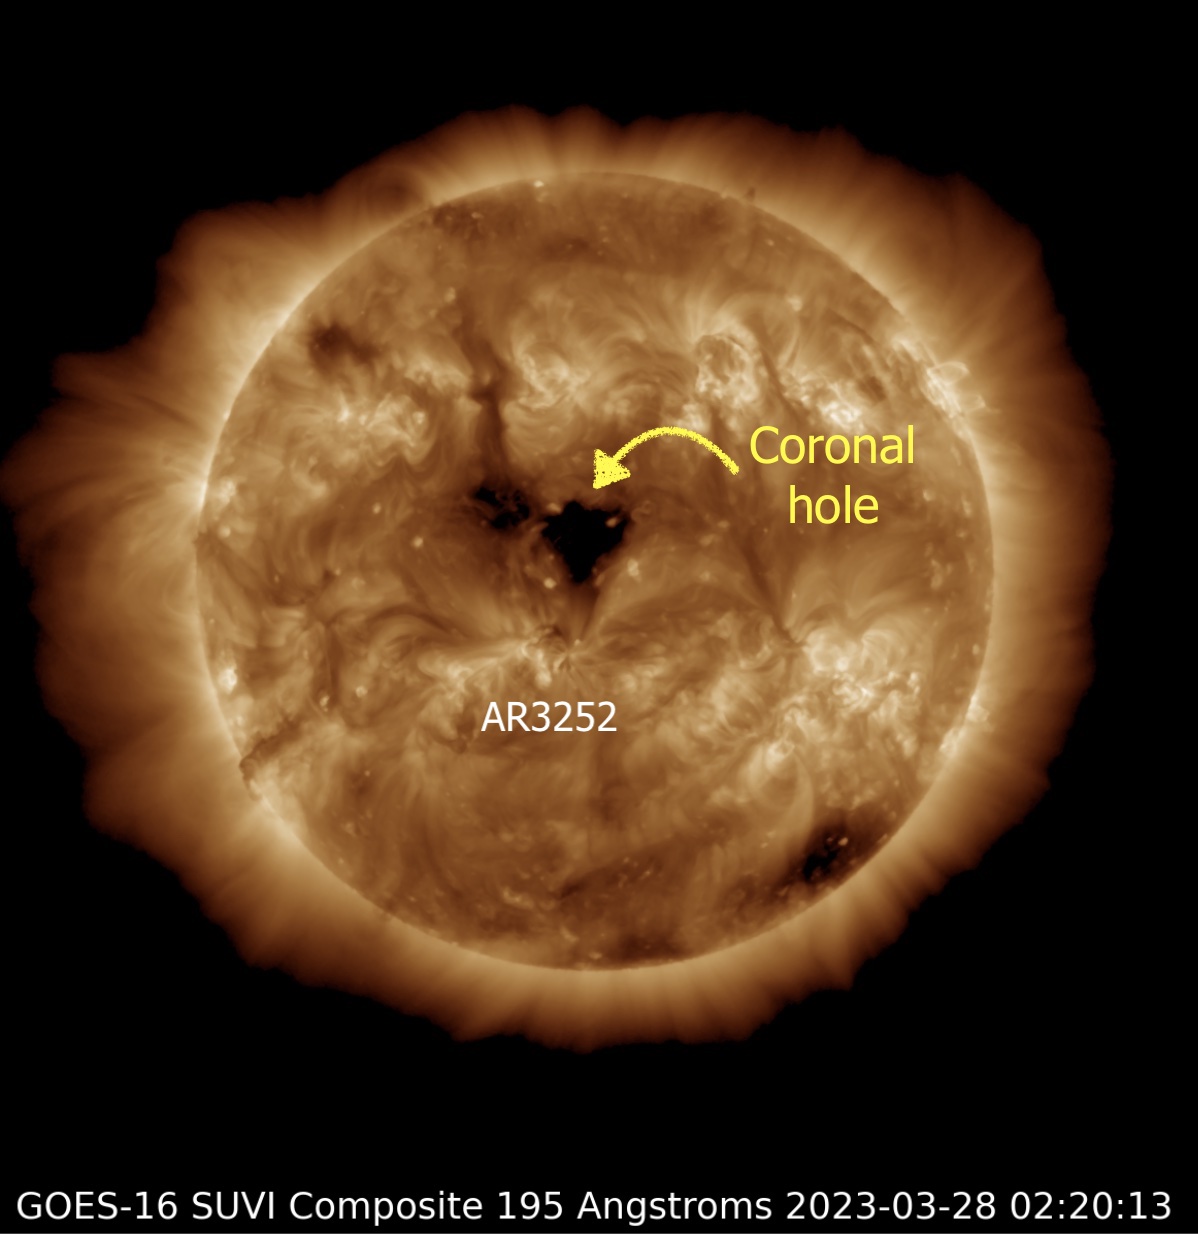 March 28, 2023 sun activity showing a coronal hole close to an sunspot region.